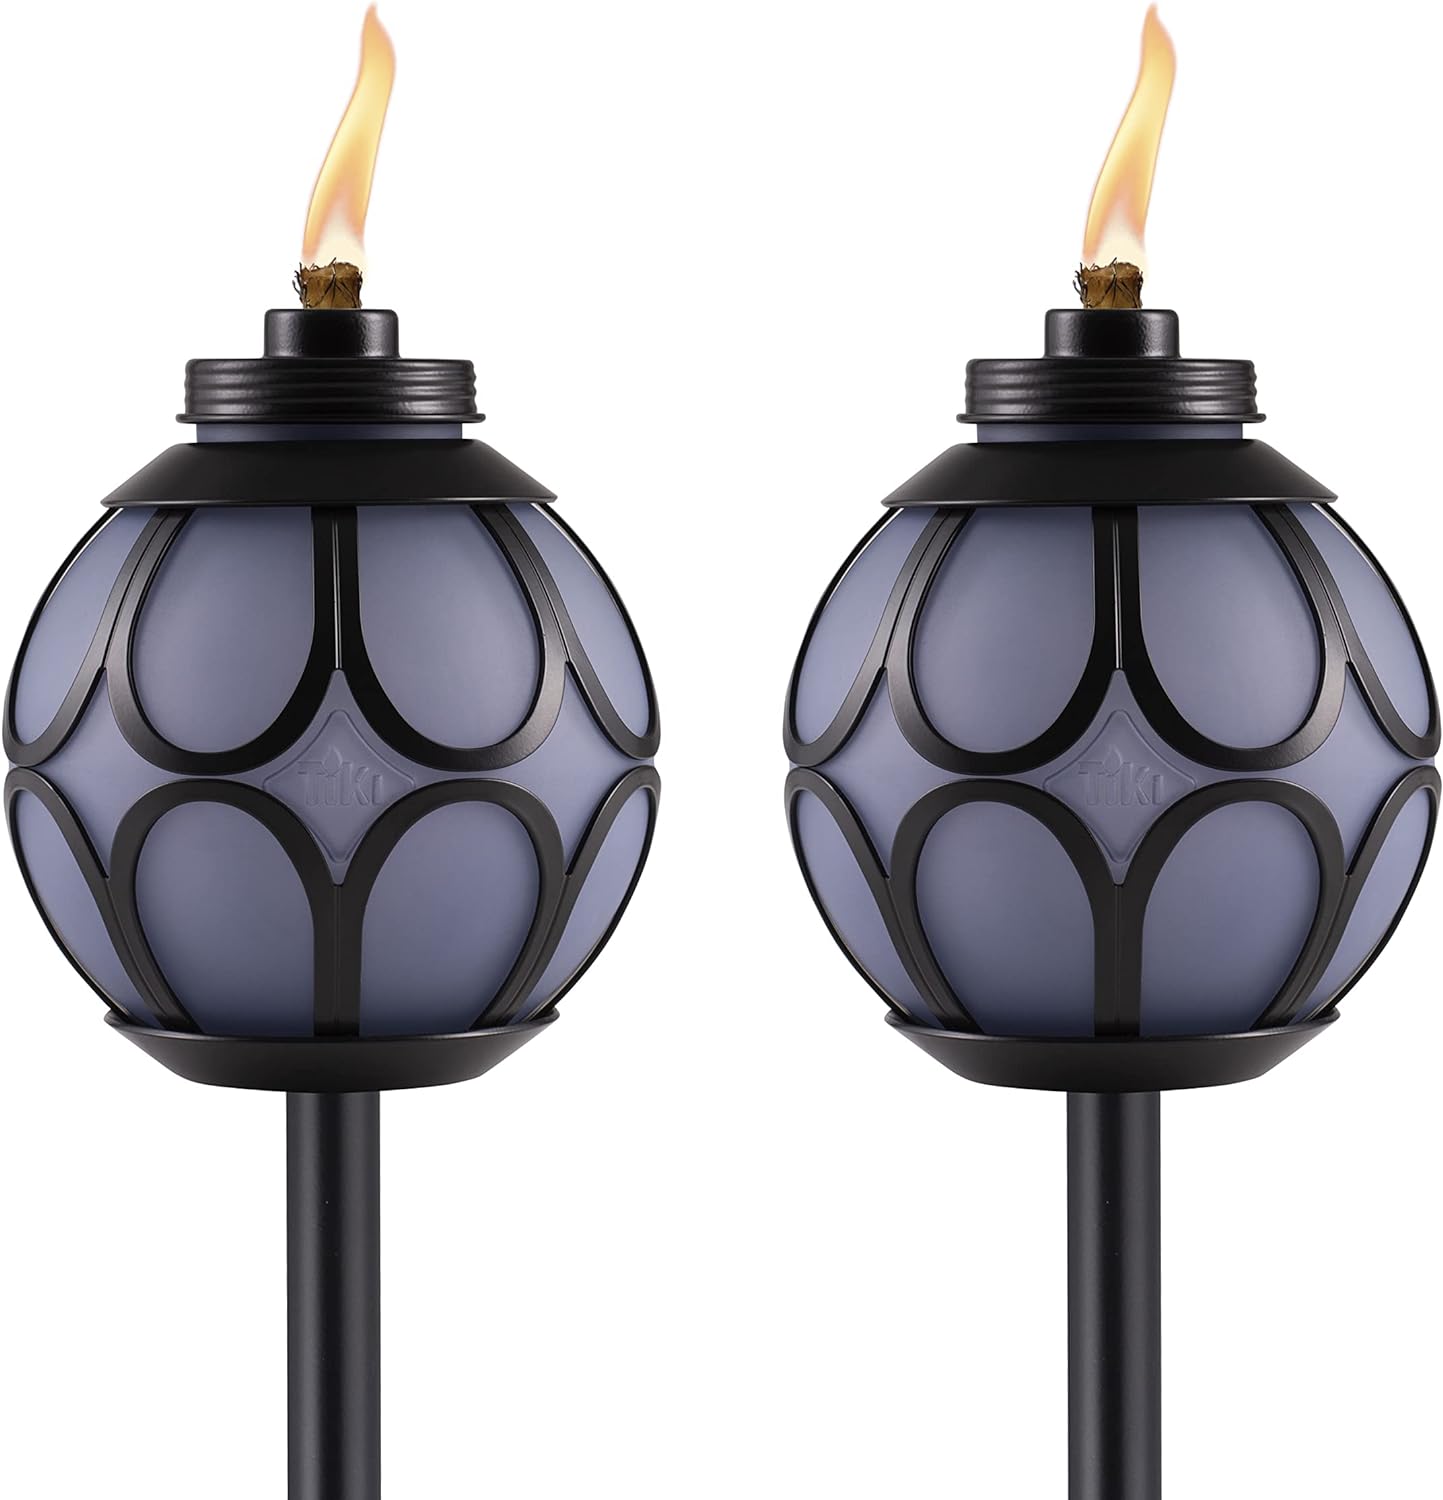 TIKI Brand 2-Pack Metal Globe Glass Easy Install Tiki Torch, Outdoor Decorative Lighting for Lawn Patio Backyard, 64 Inch, Blue and Black, 1122124